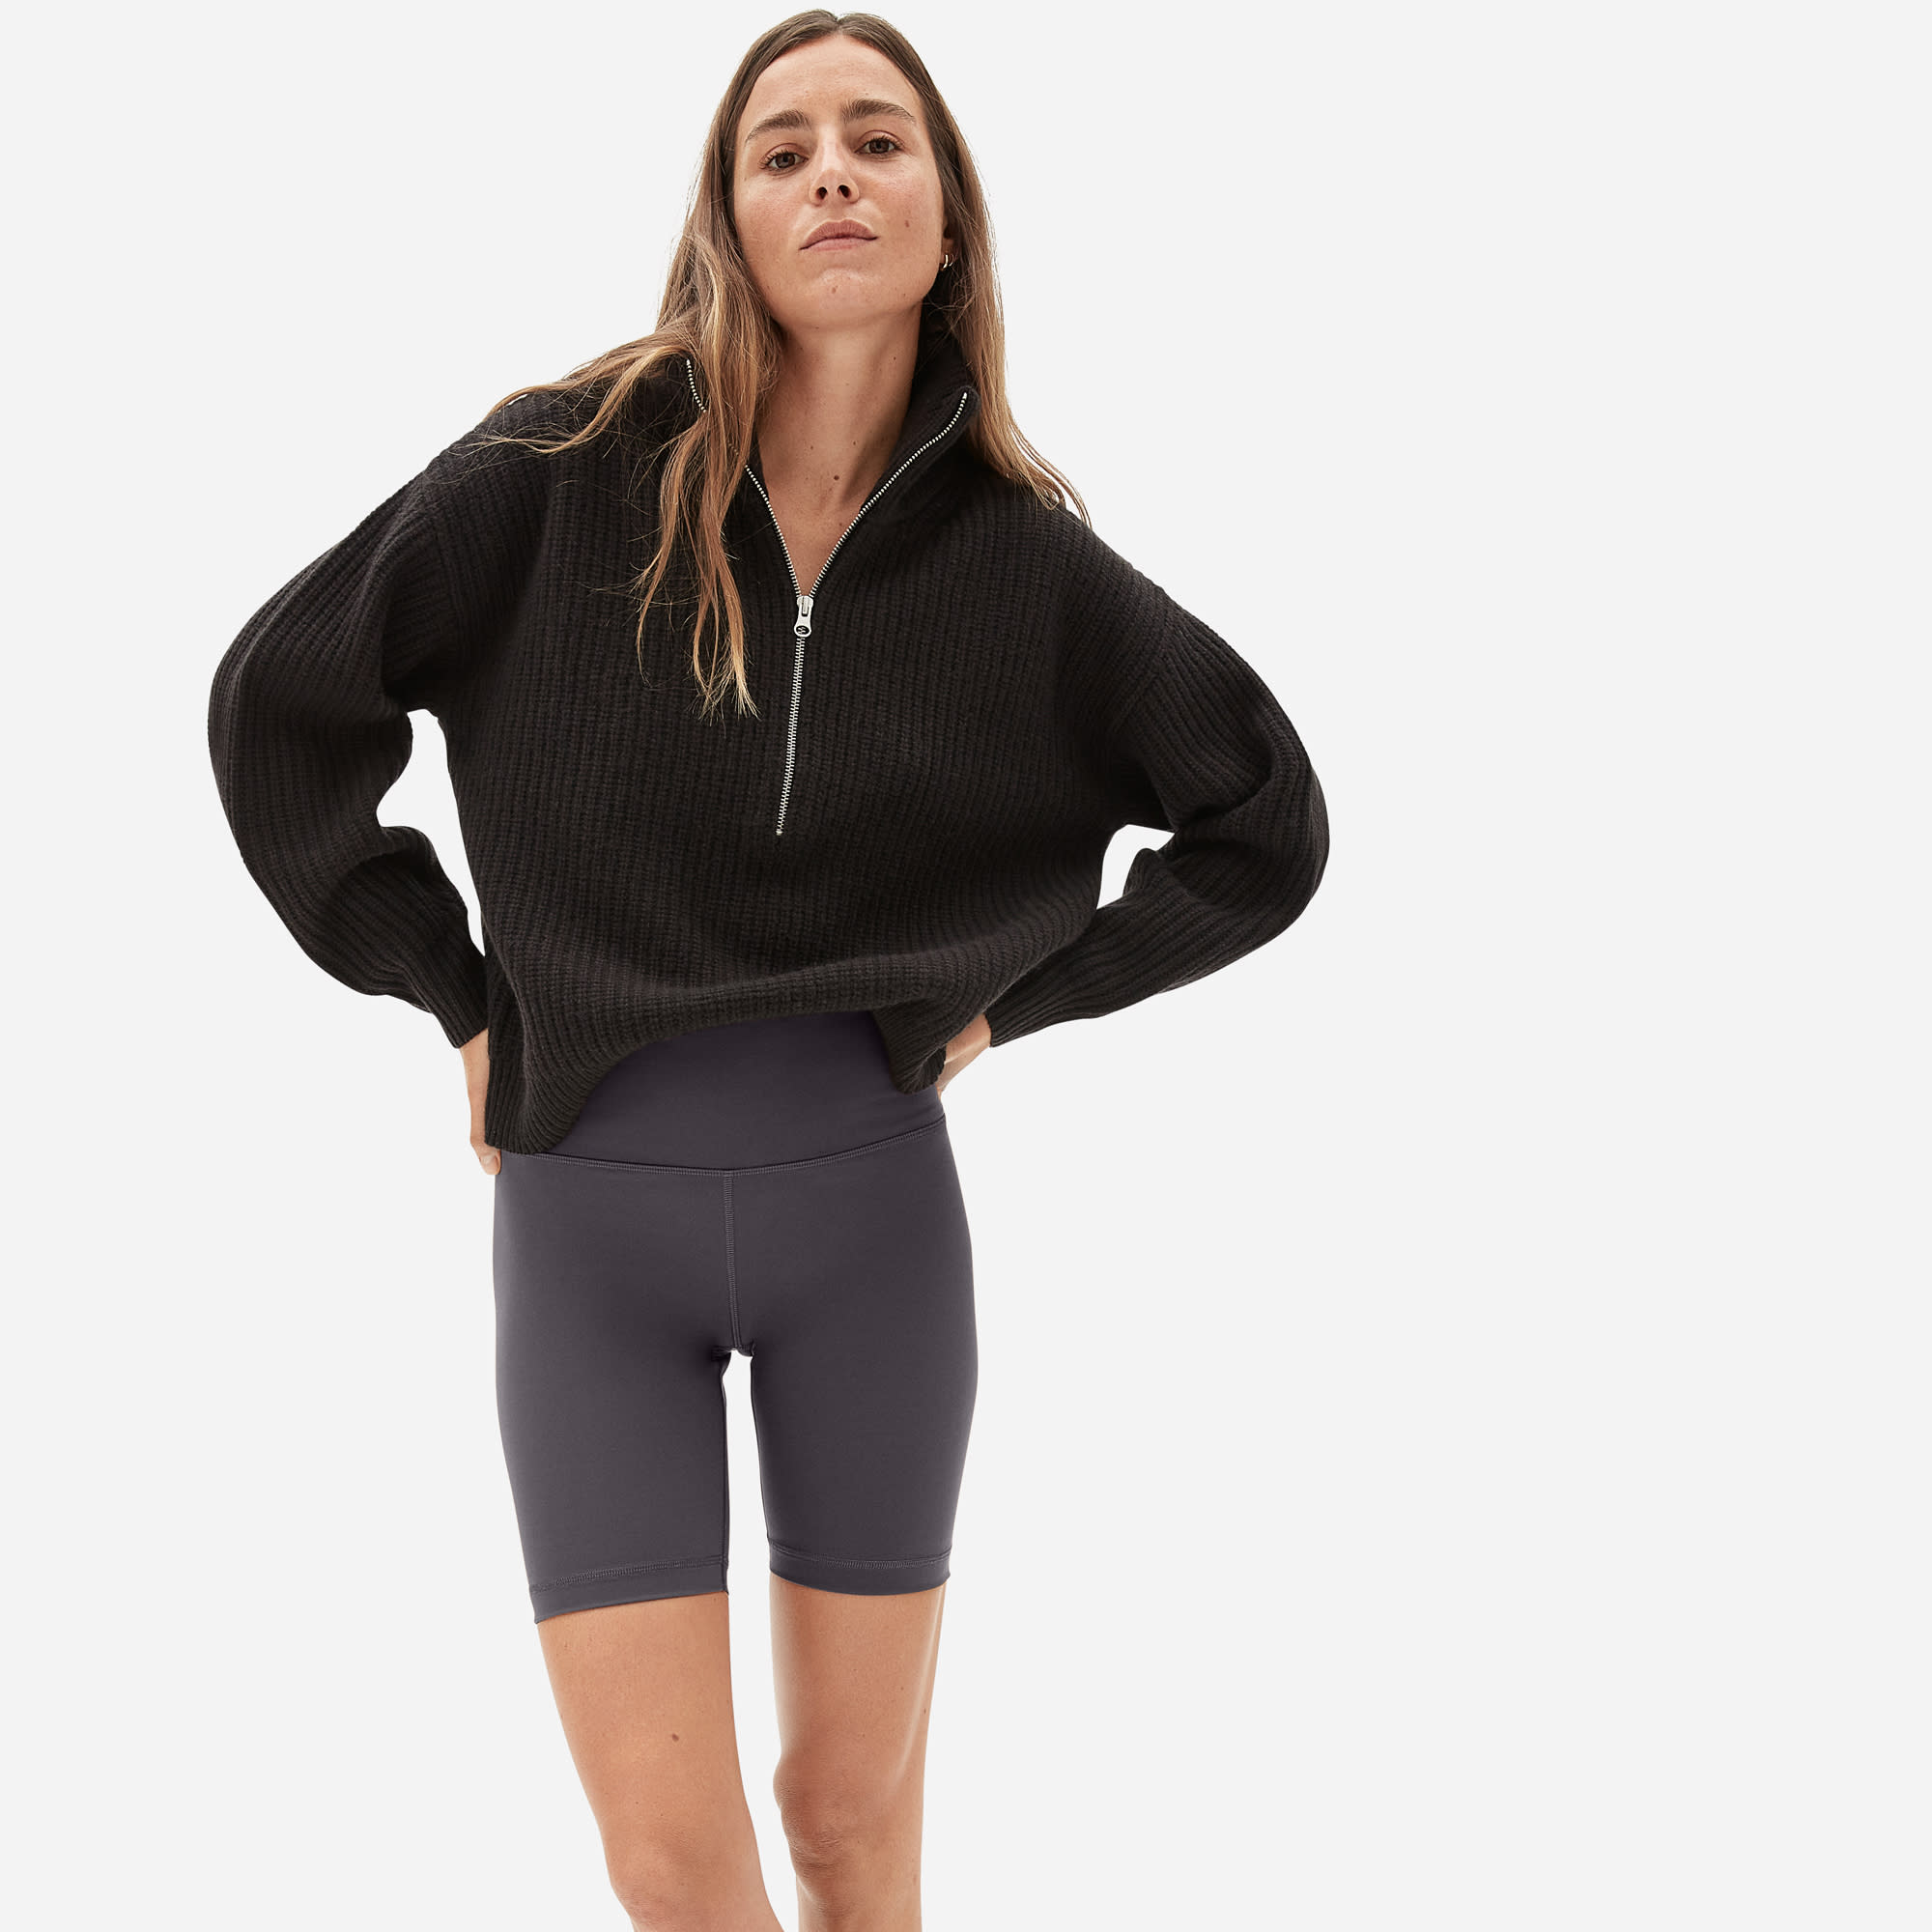 Everlane Perform Bike Short Review - Jeans and a Teacup